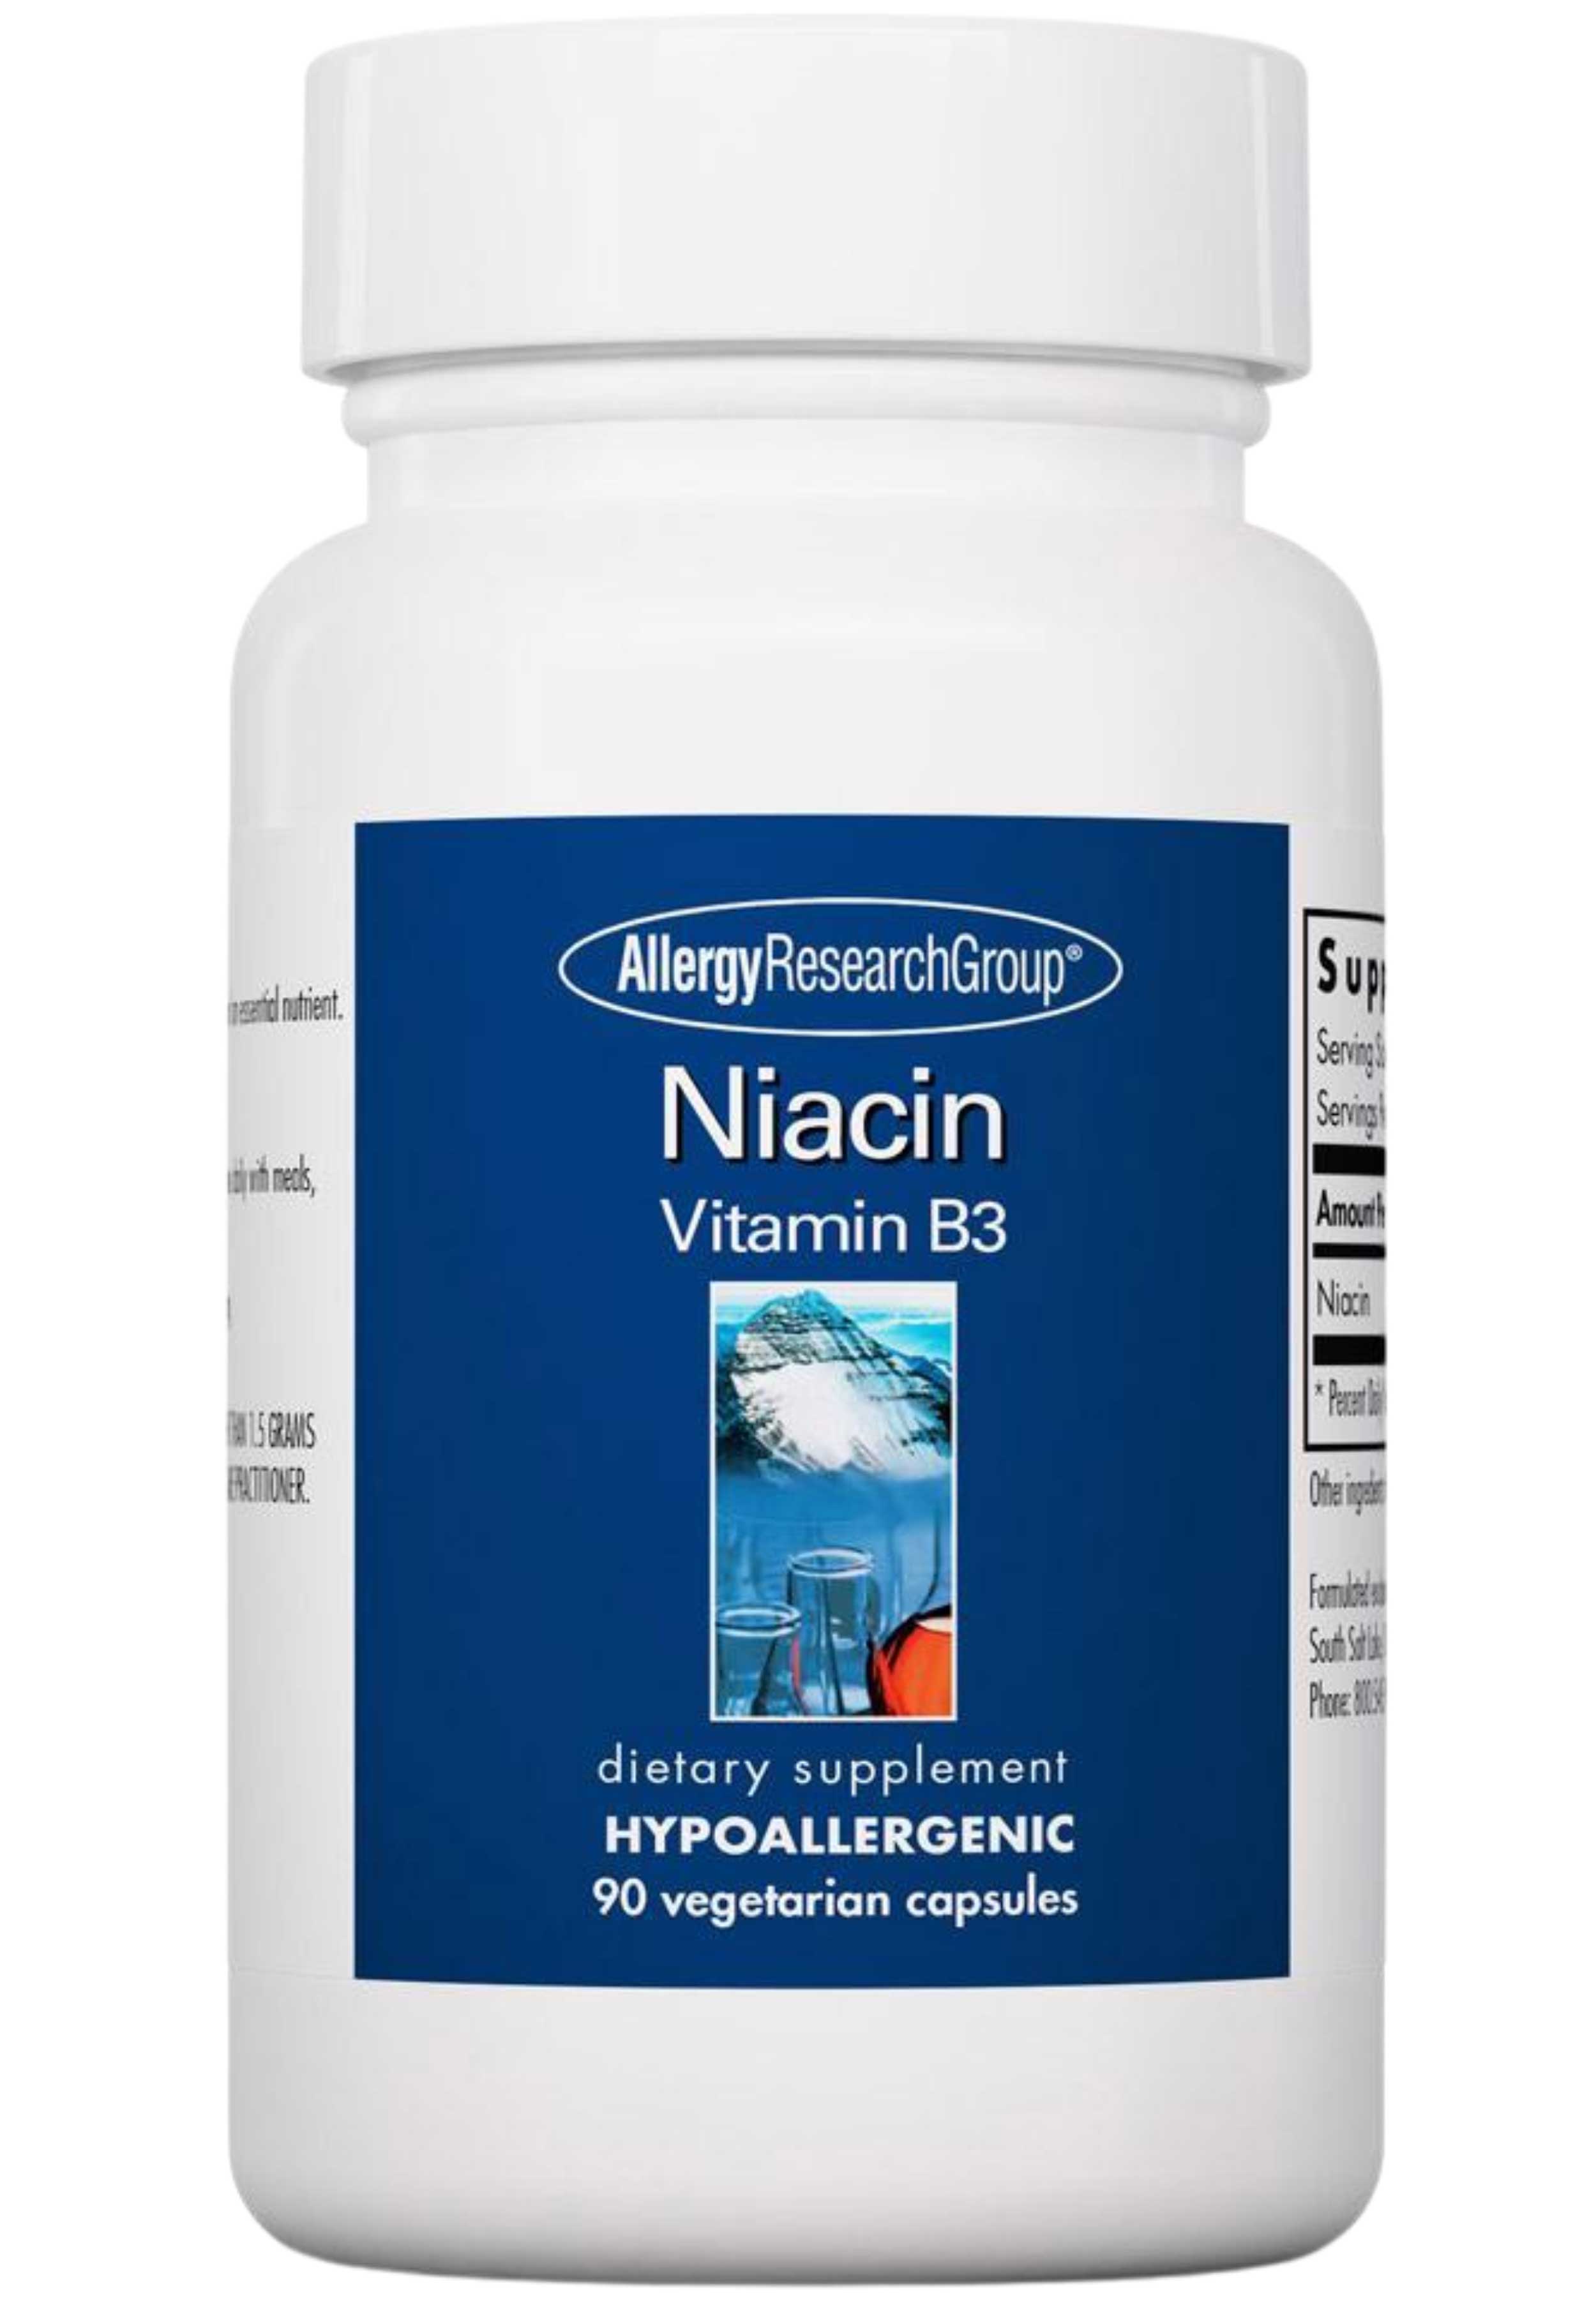 Allergy Research Group Niacin